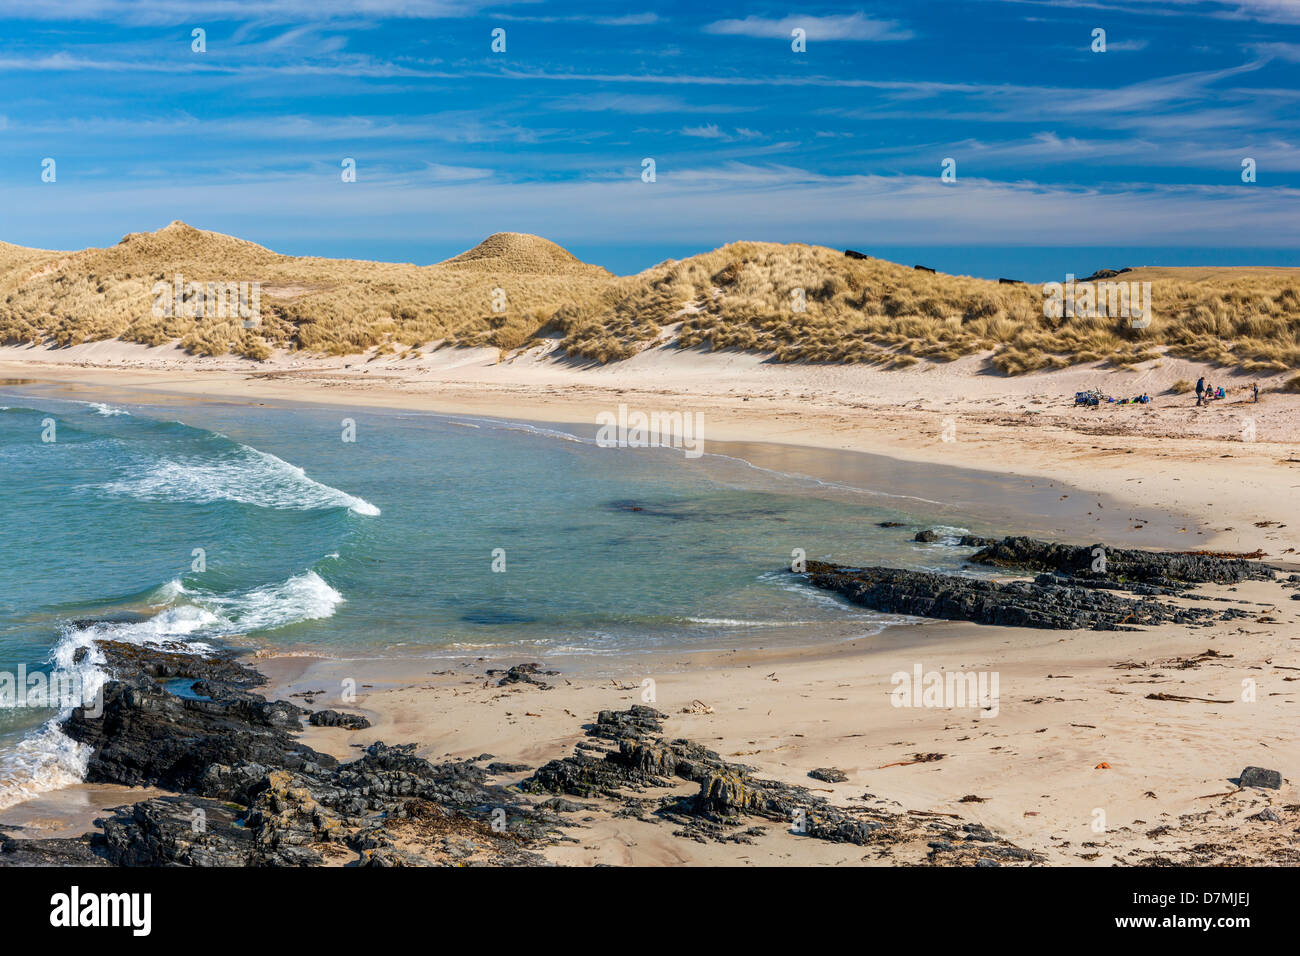 View of Balnakeil Bay in the north Highlands Bay near Durness., Scotland, UK, Europe. Stock Photo